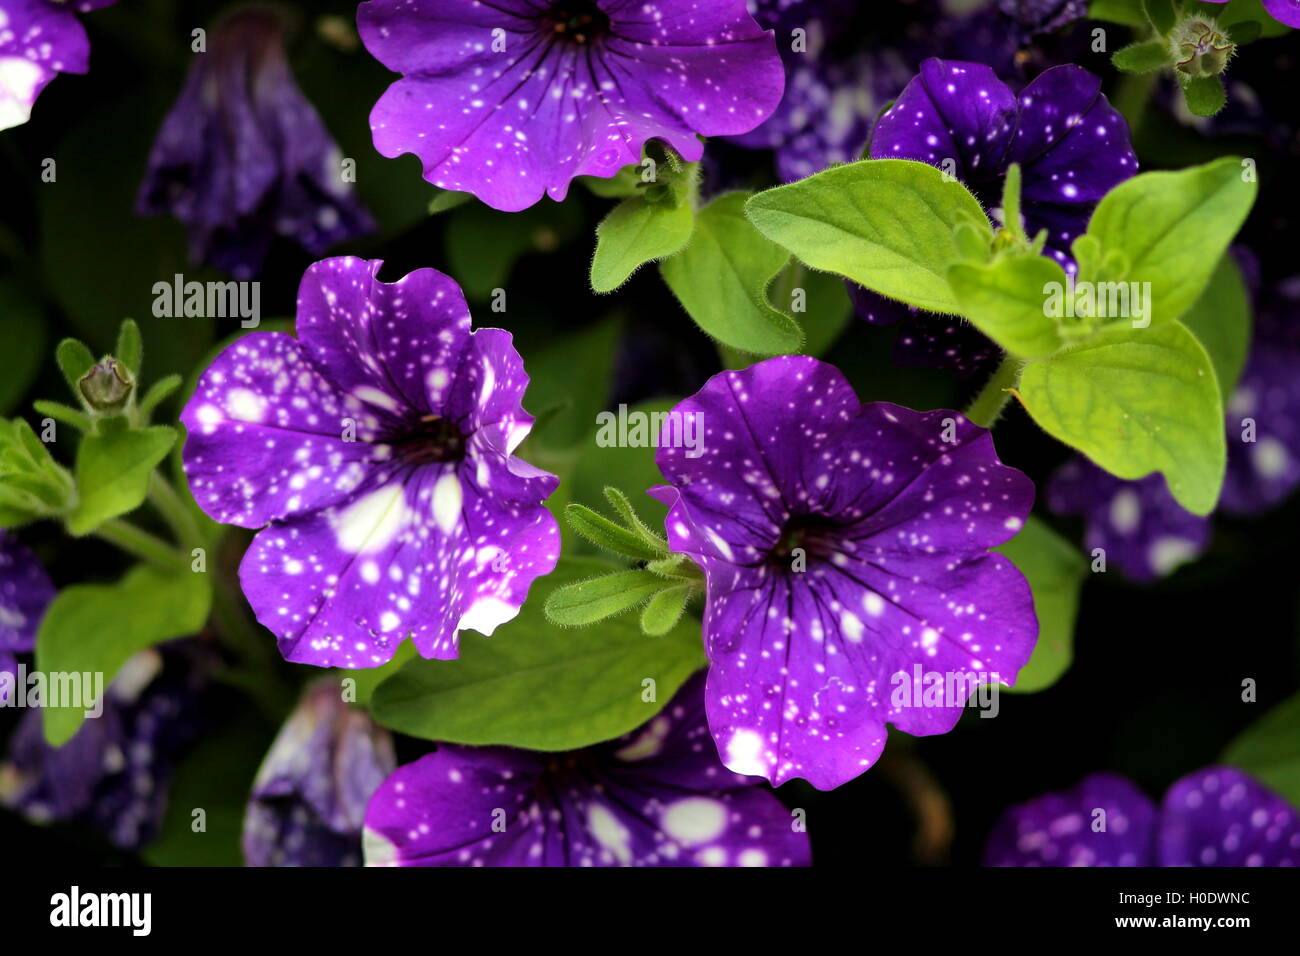 A cluster of purple with white points petunias and green leaves Stock ...